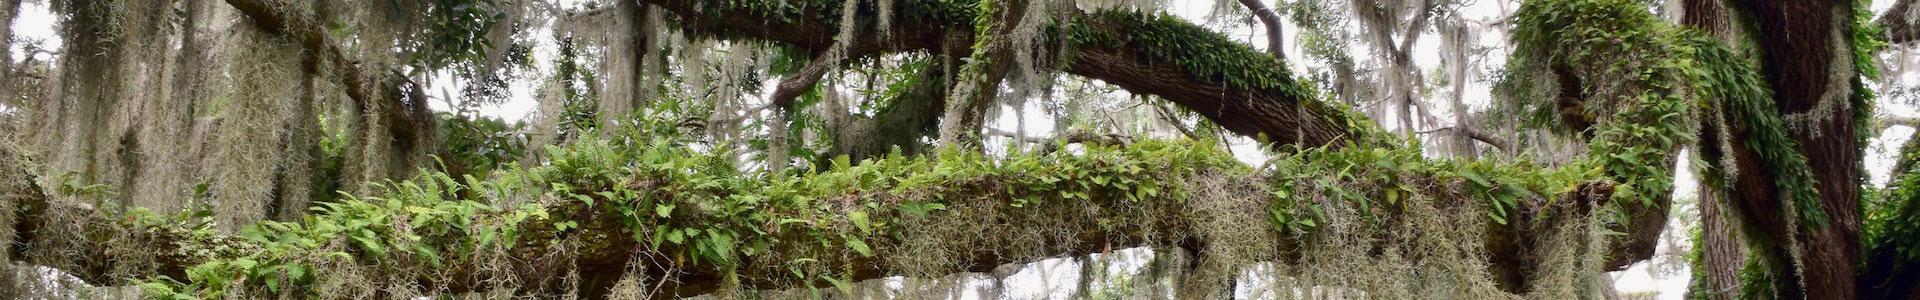 Live oak branches with moss